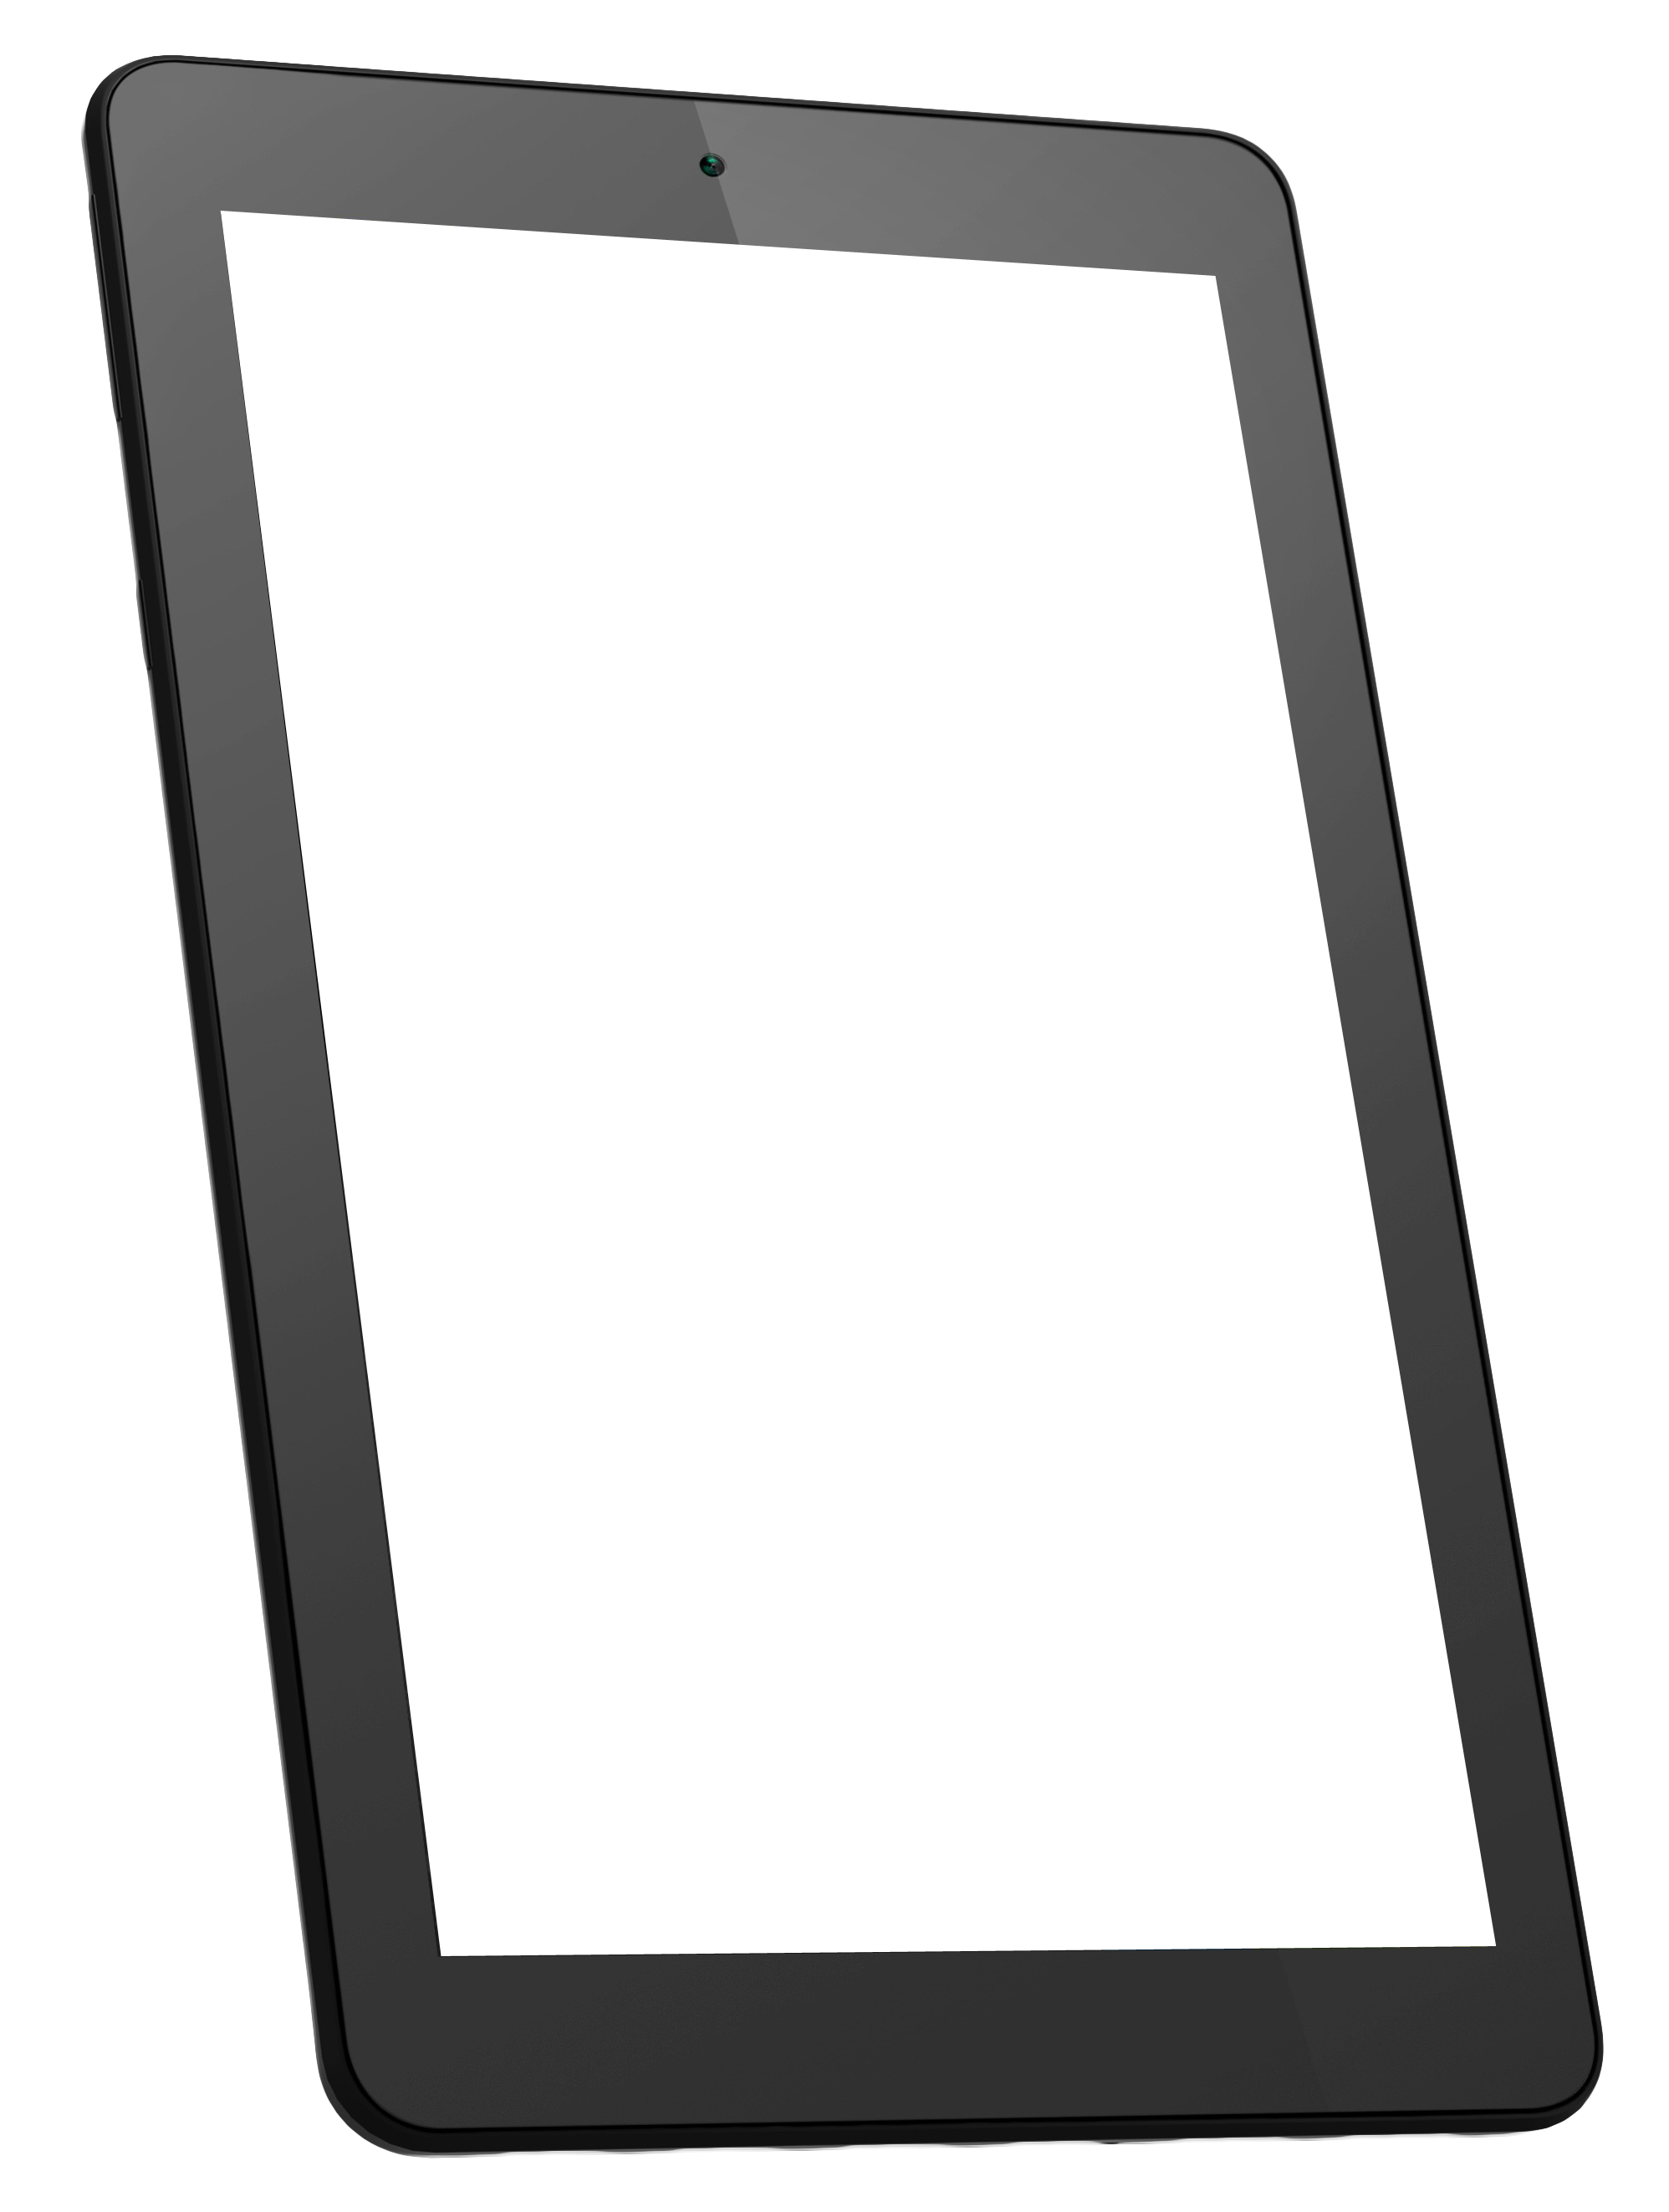 Tablet Png 1996 X 2646